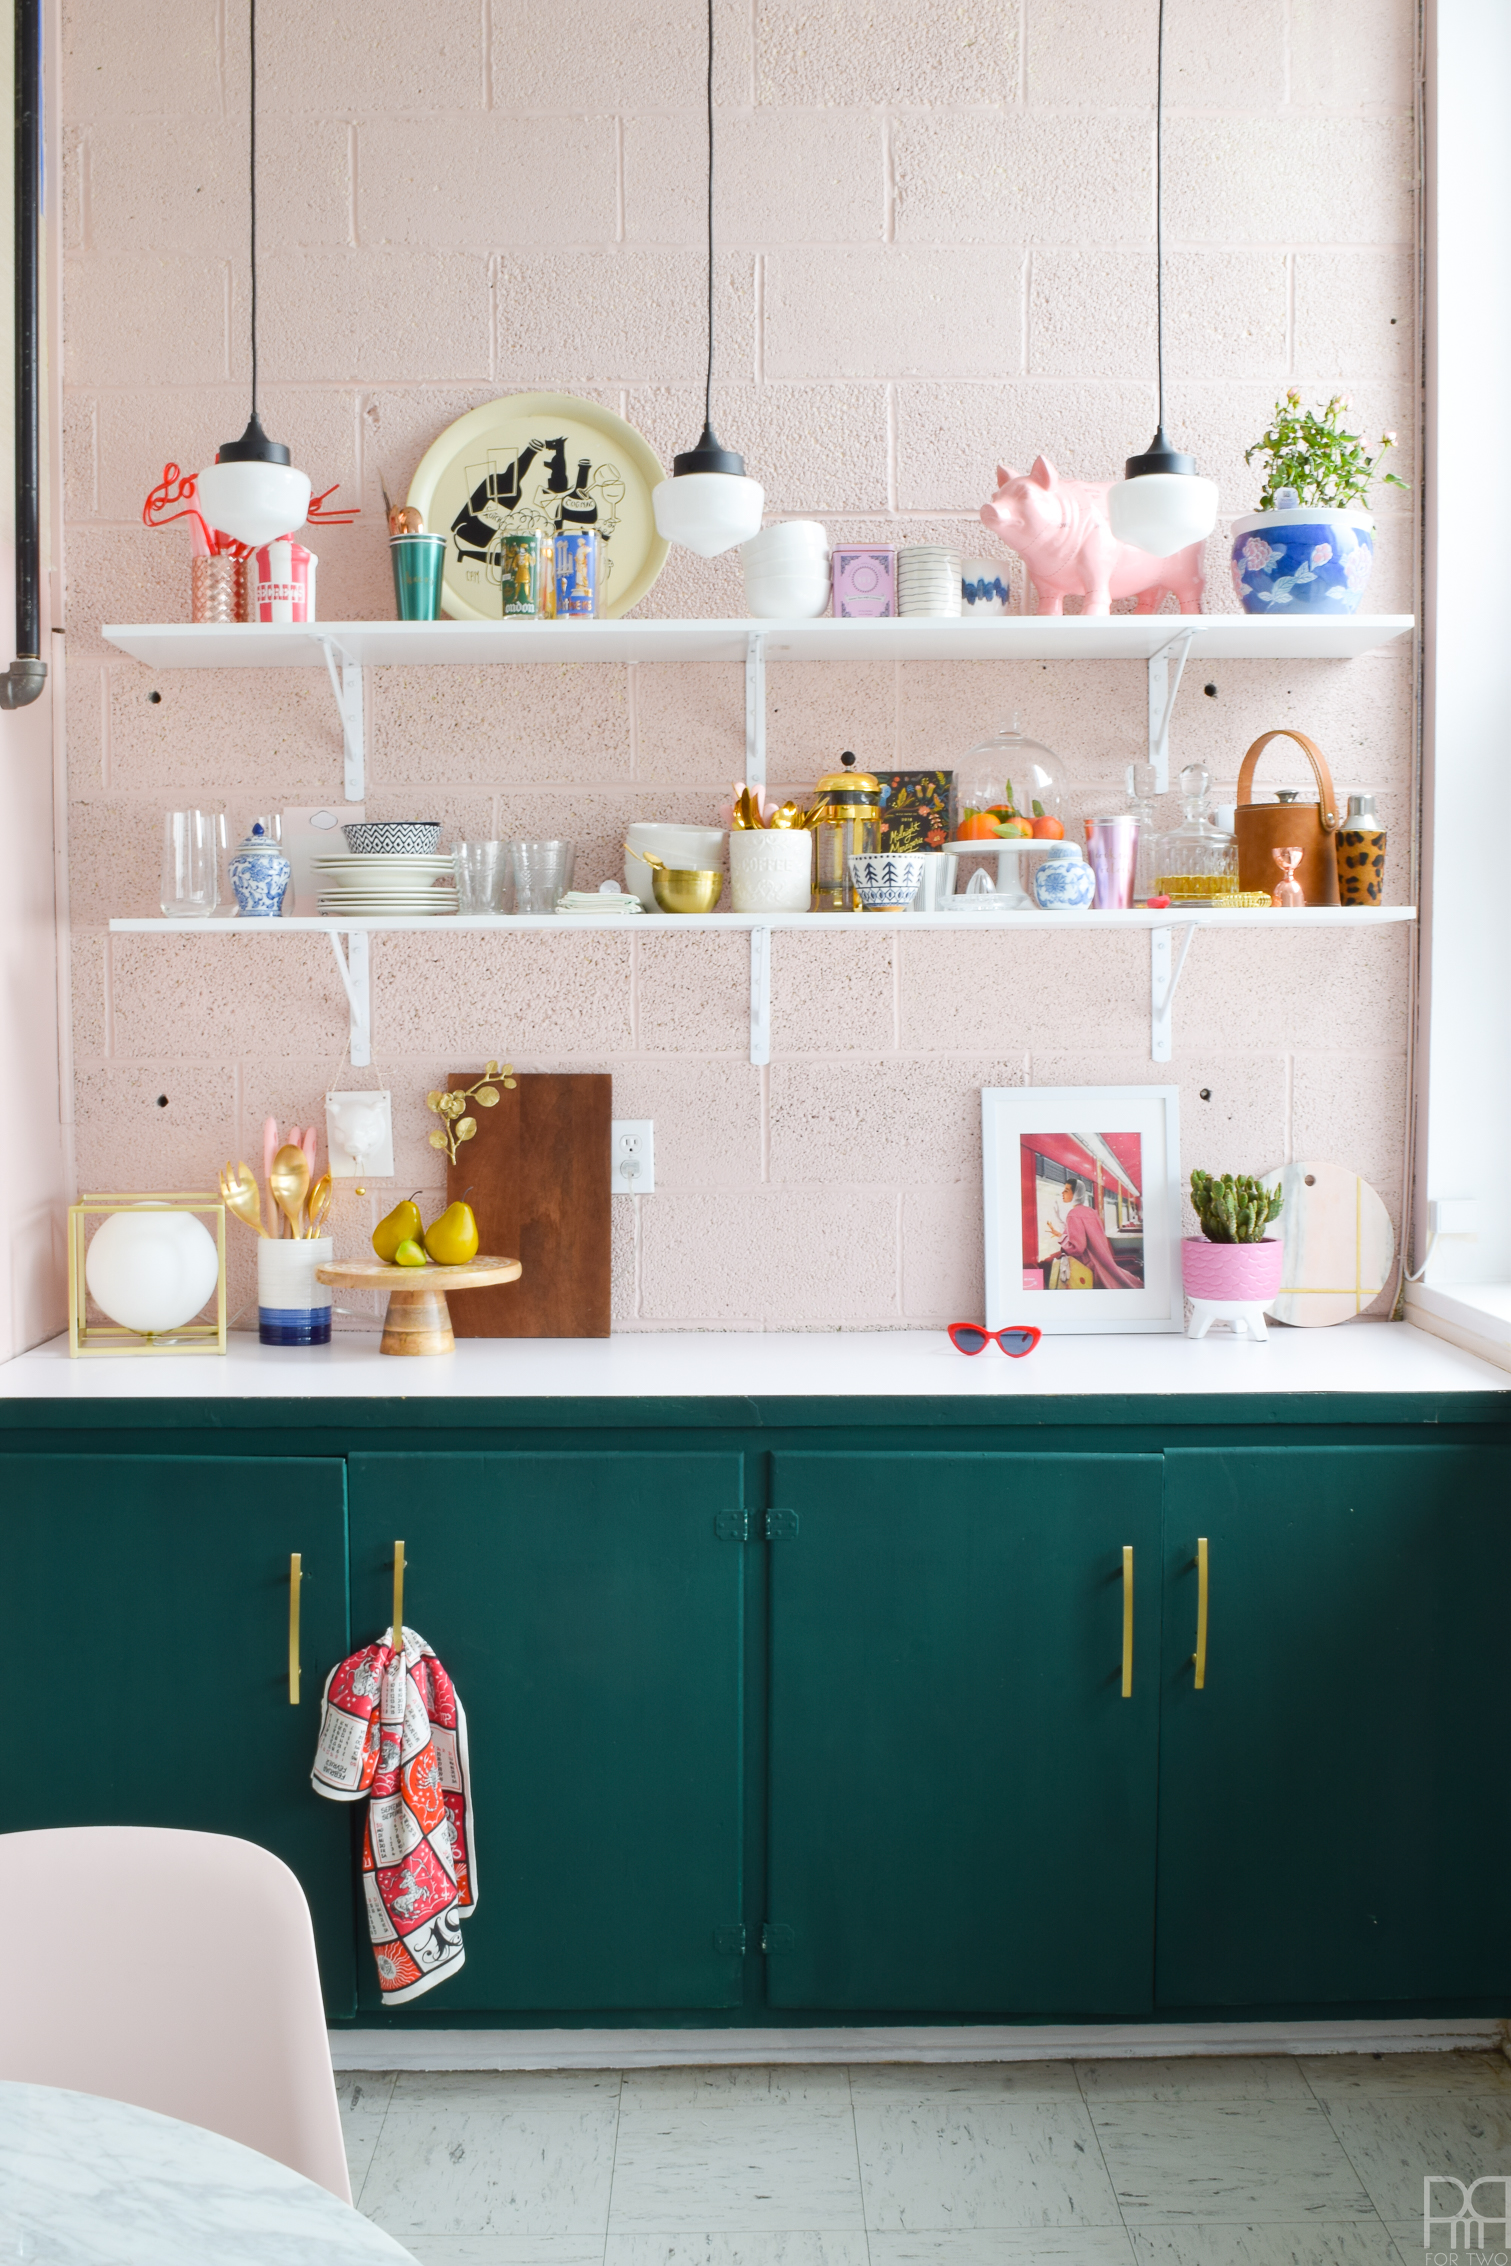 The eclectic & bold kitchen makeover to end all rental kitchen makeovers. Come see how we transformed this space using paint and well curated accessories. FAT Paint's Cascadia green & BEHR's Bella Mia truly get to shine in this makeover.